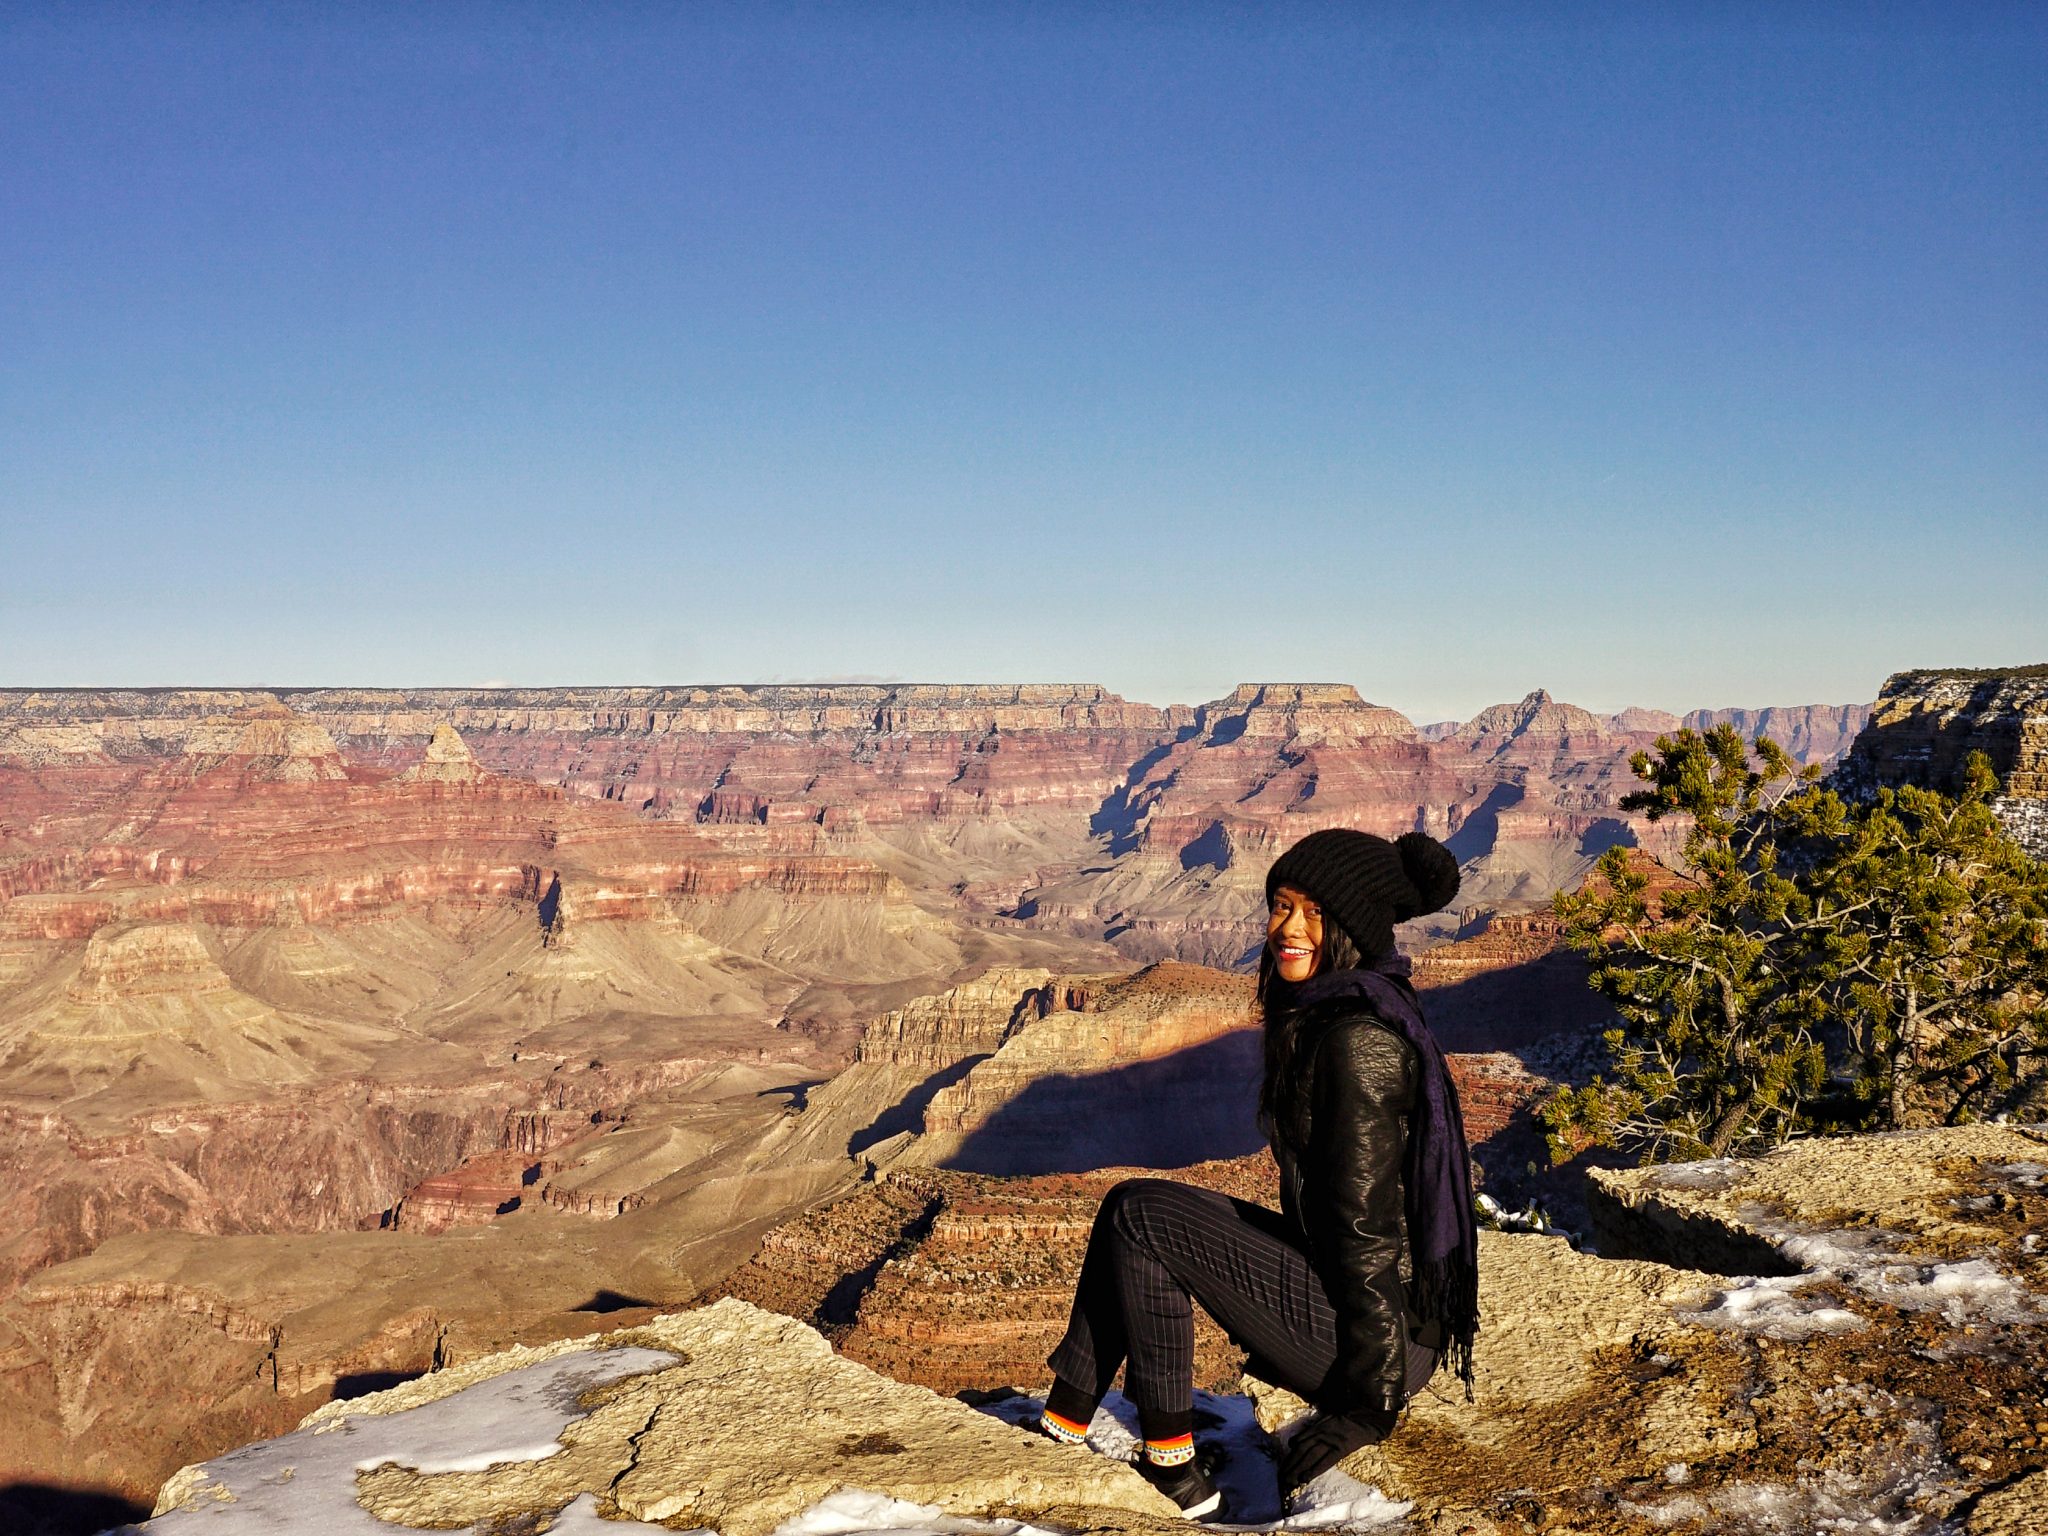 Visiting the Grand Canyon in January